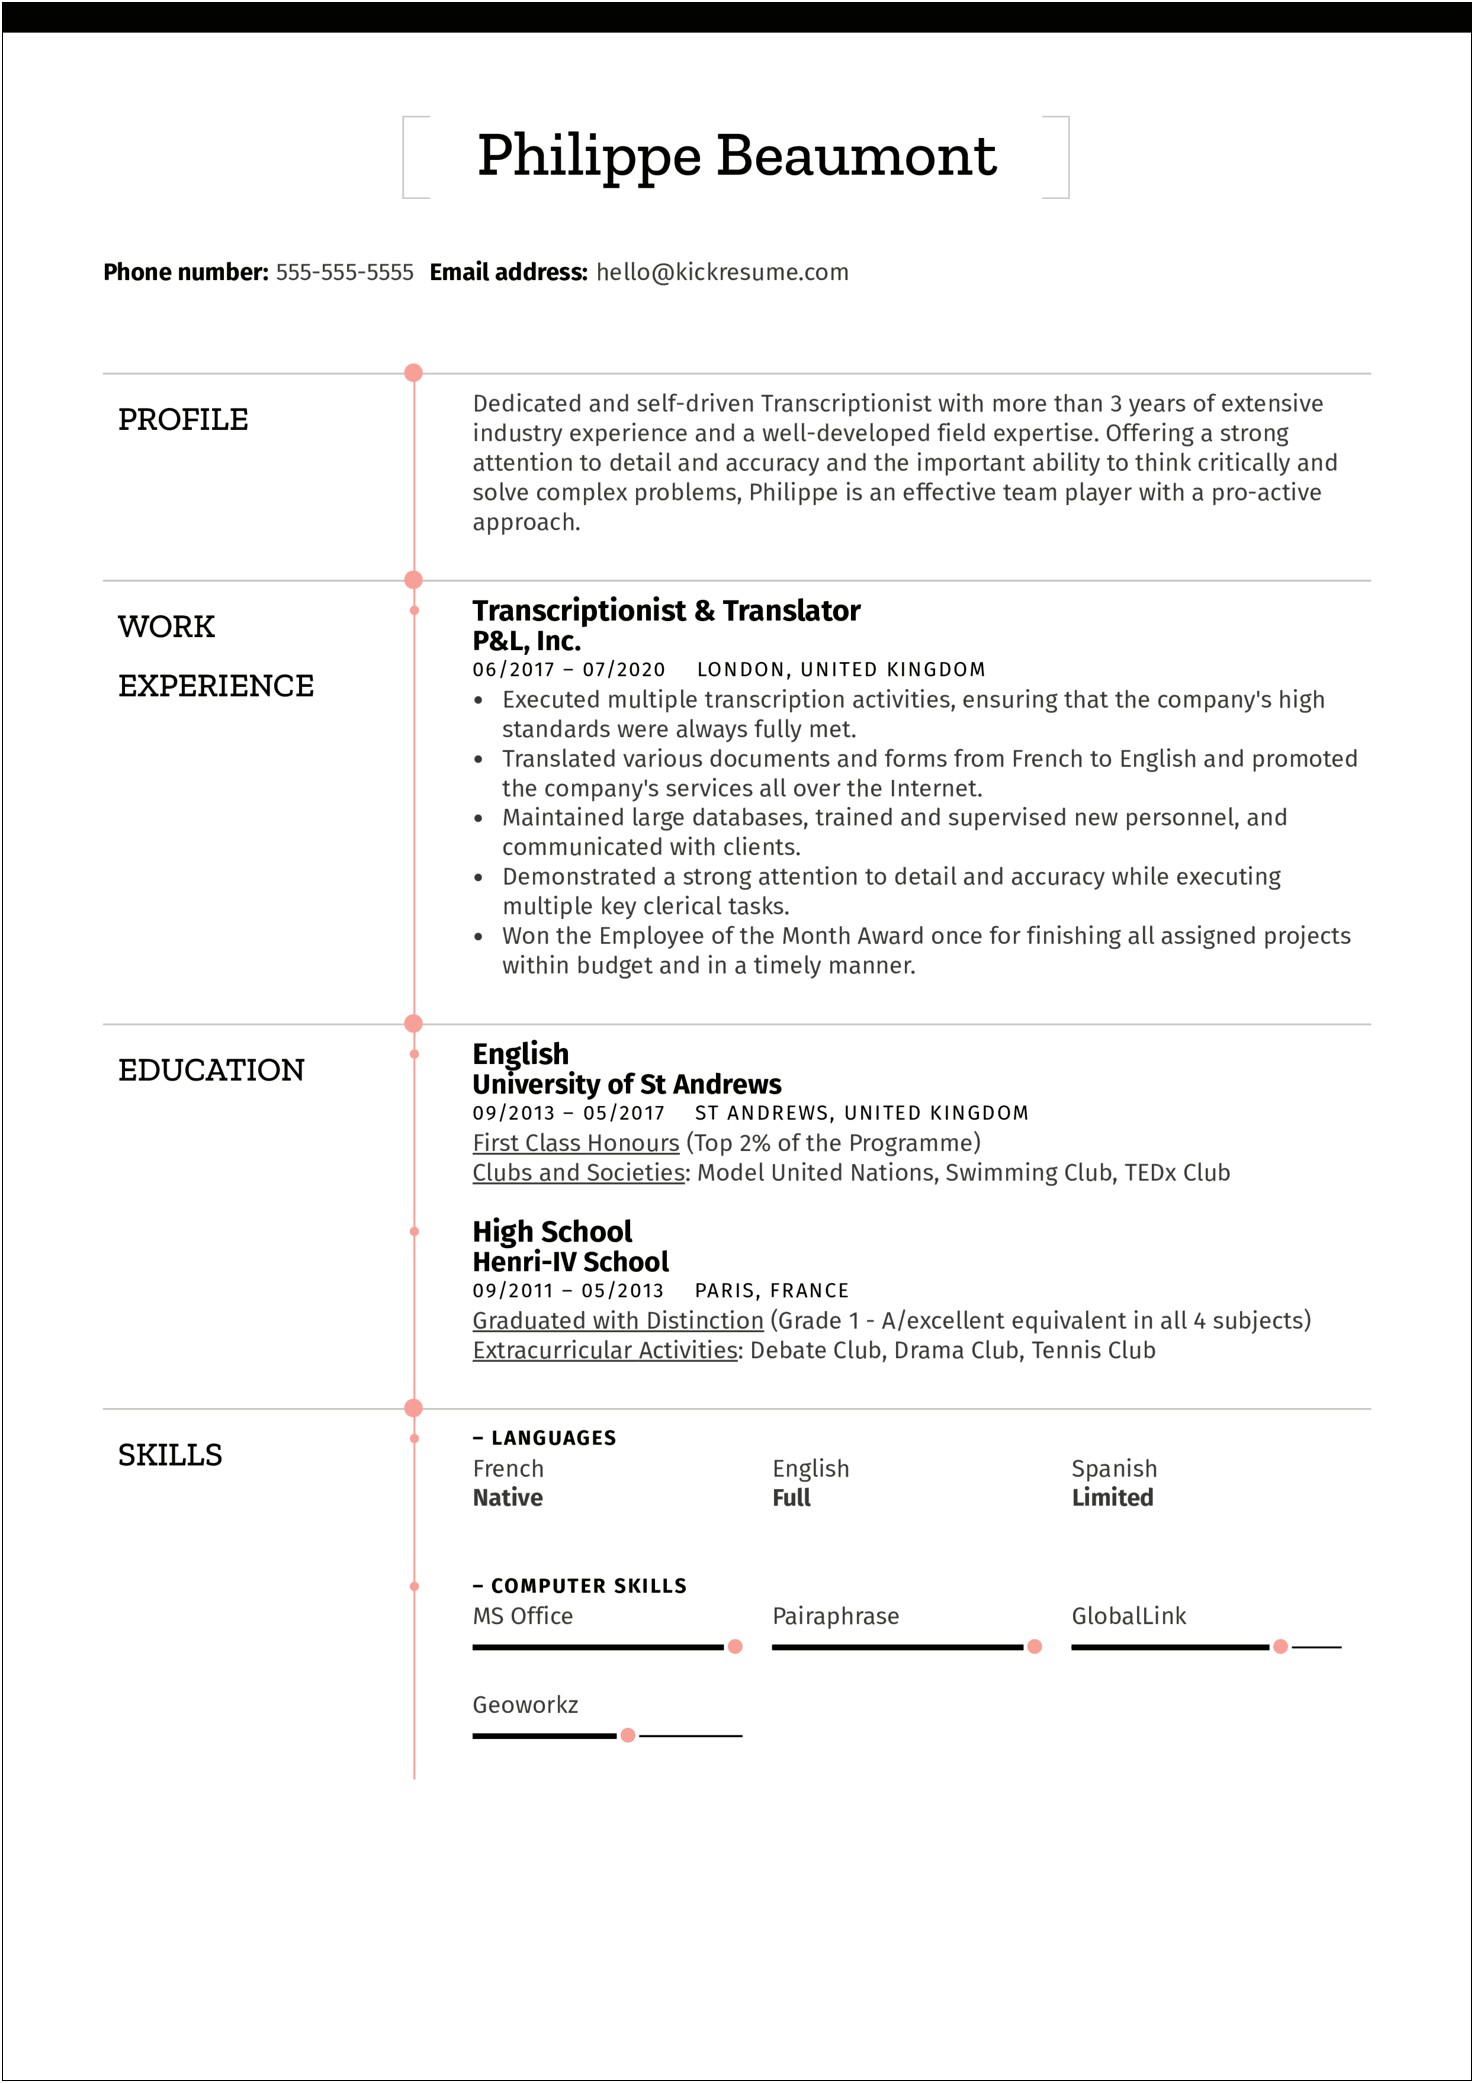 Extracurricular Activities For Job Resume